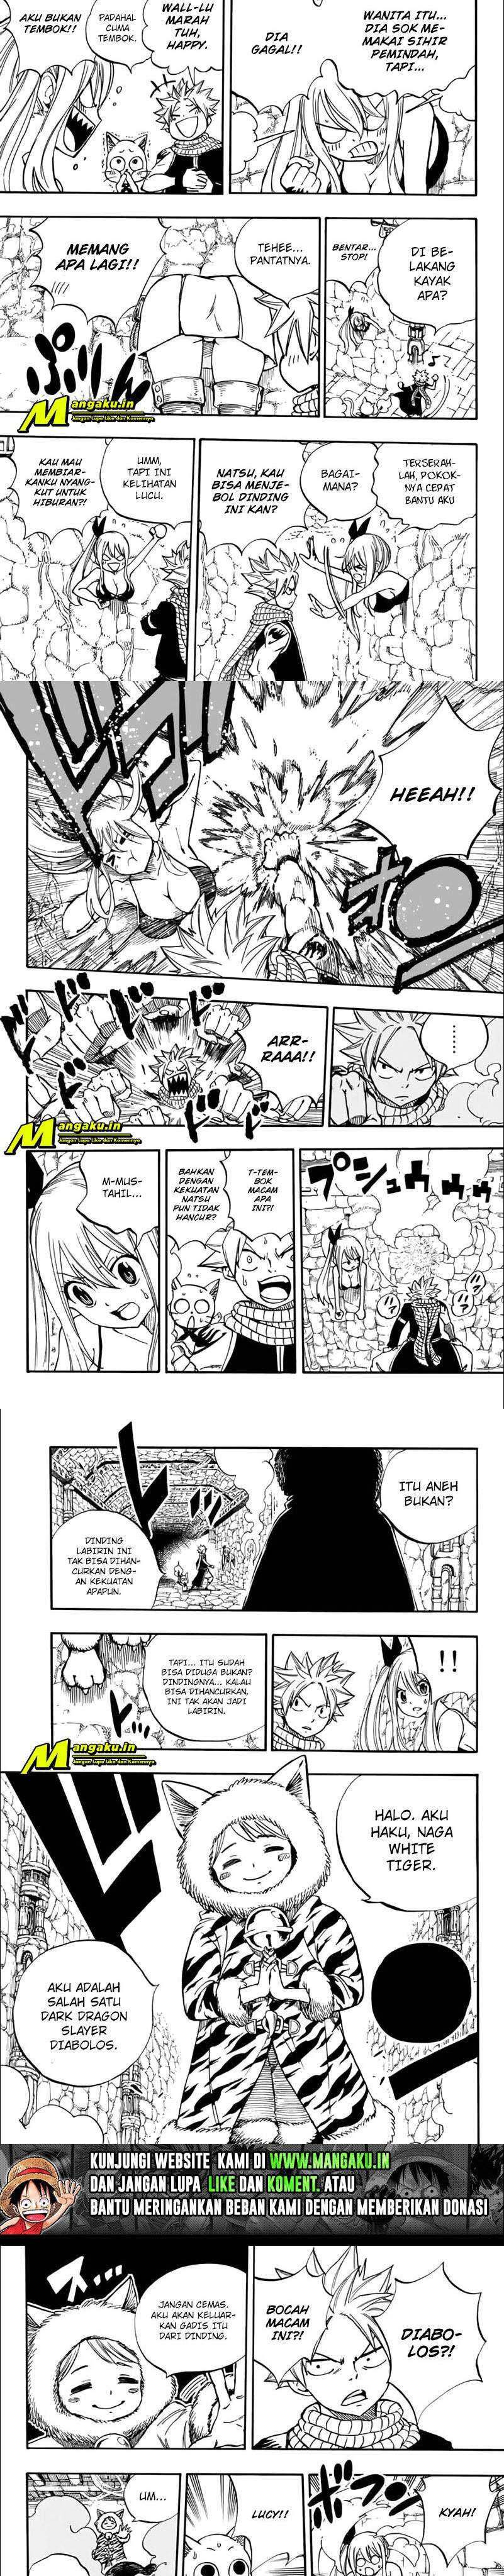 Fairy Tail 100 Years Quest Chapter 94